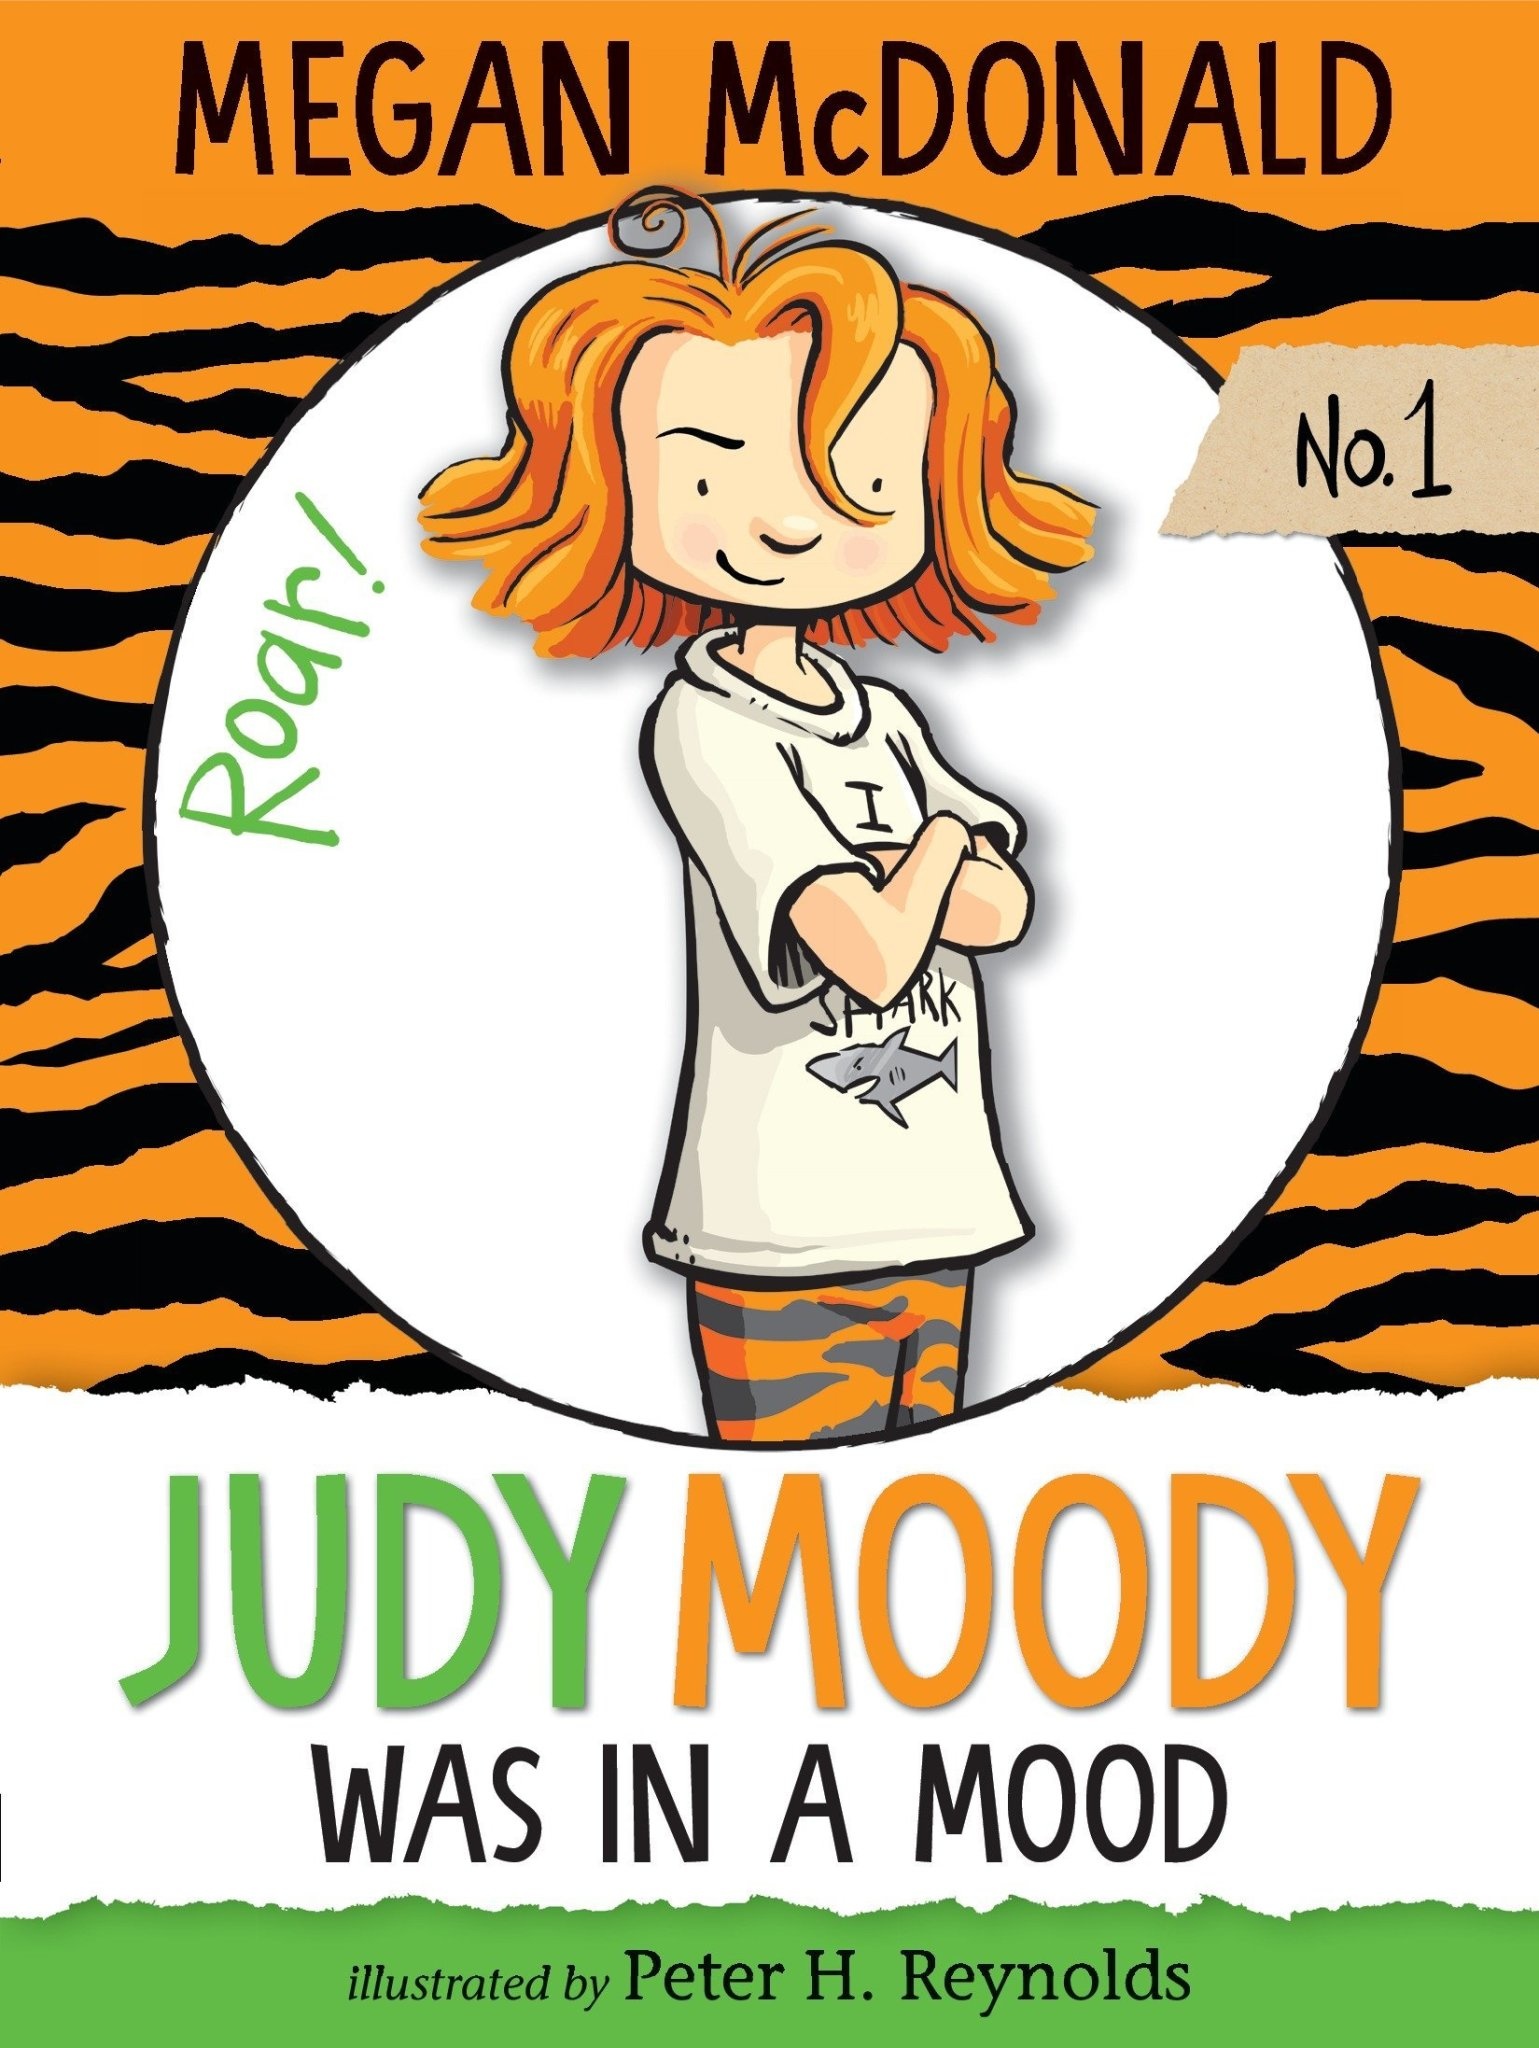 Mrs. Moody in The Birthday Jinx by Elementary Approved